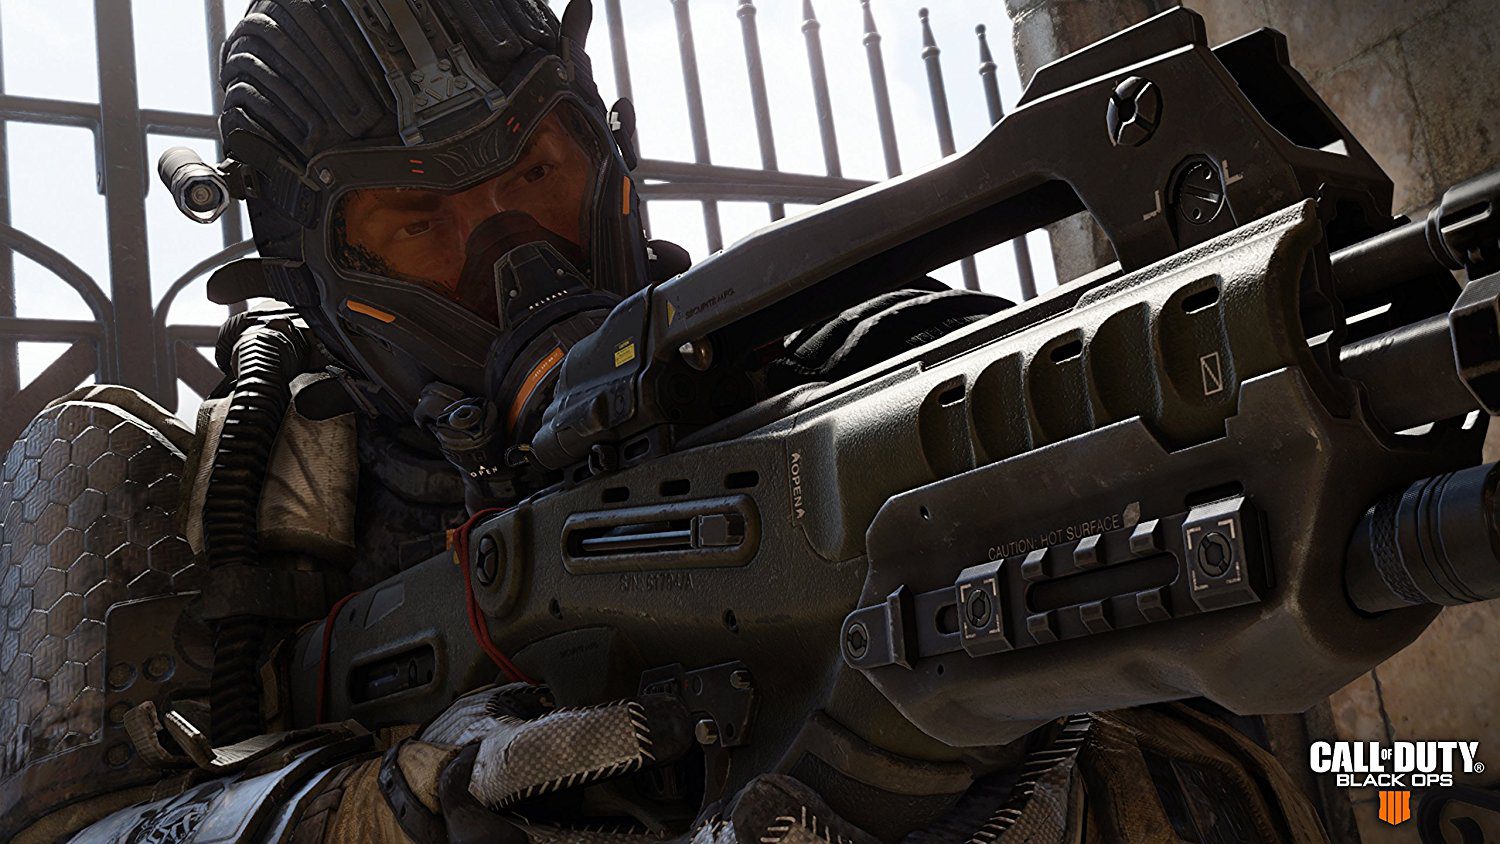 REVIEW : Call of Duty Black Ops 4 (PC)